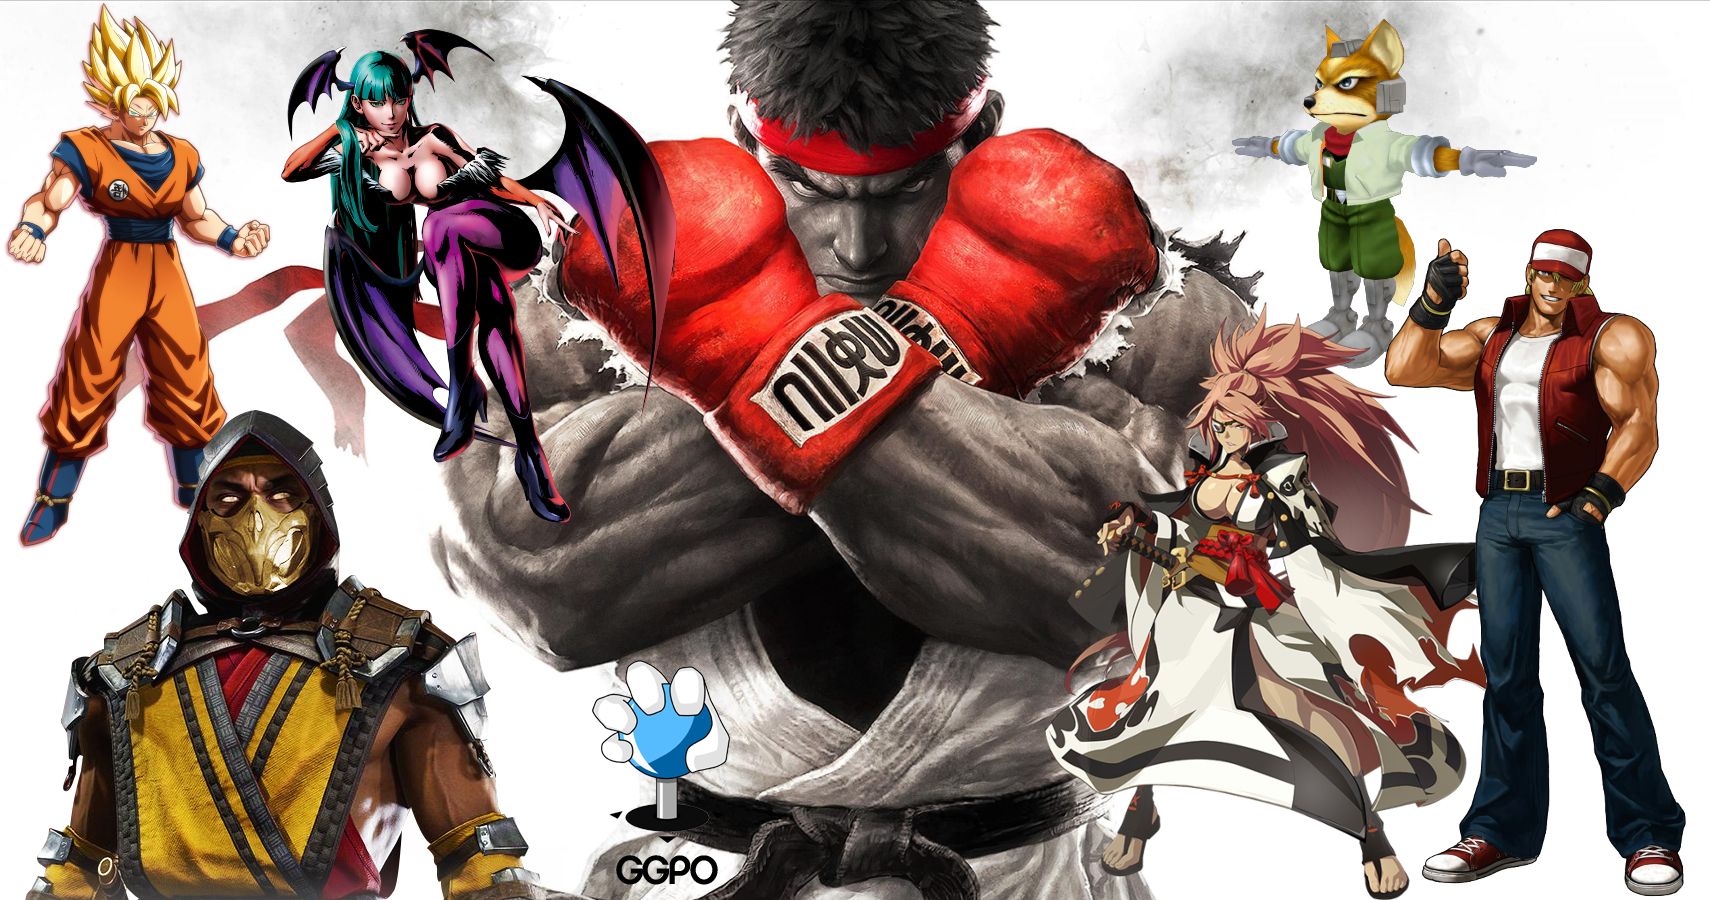 The Fighting Game Glossary is guide to all fighting games